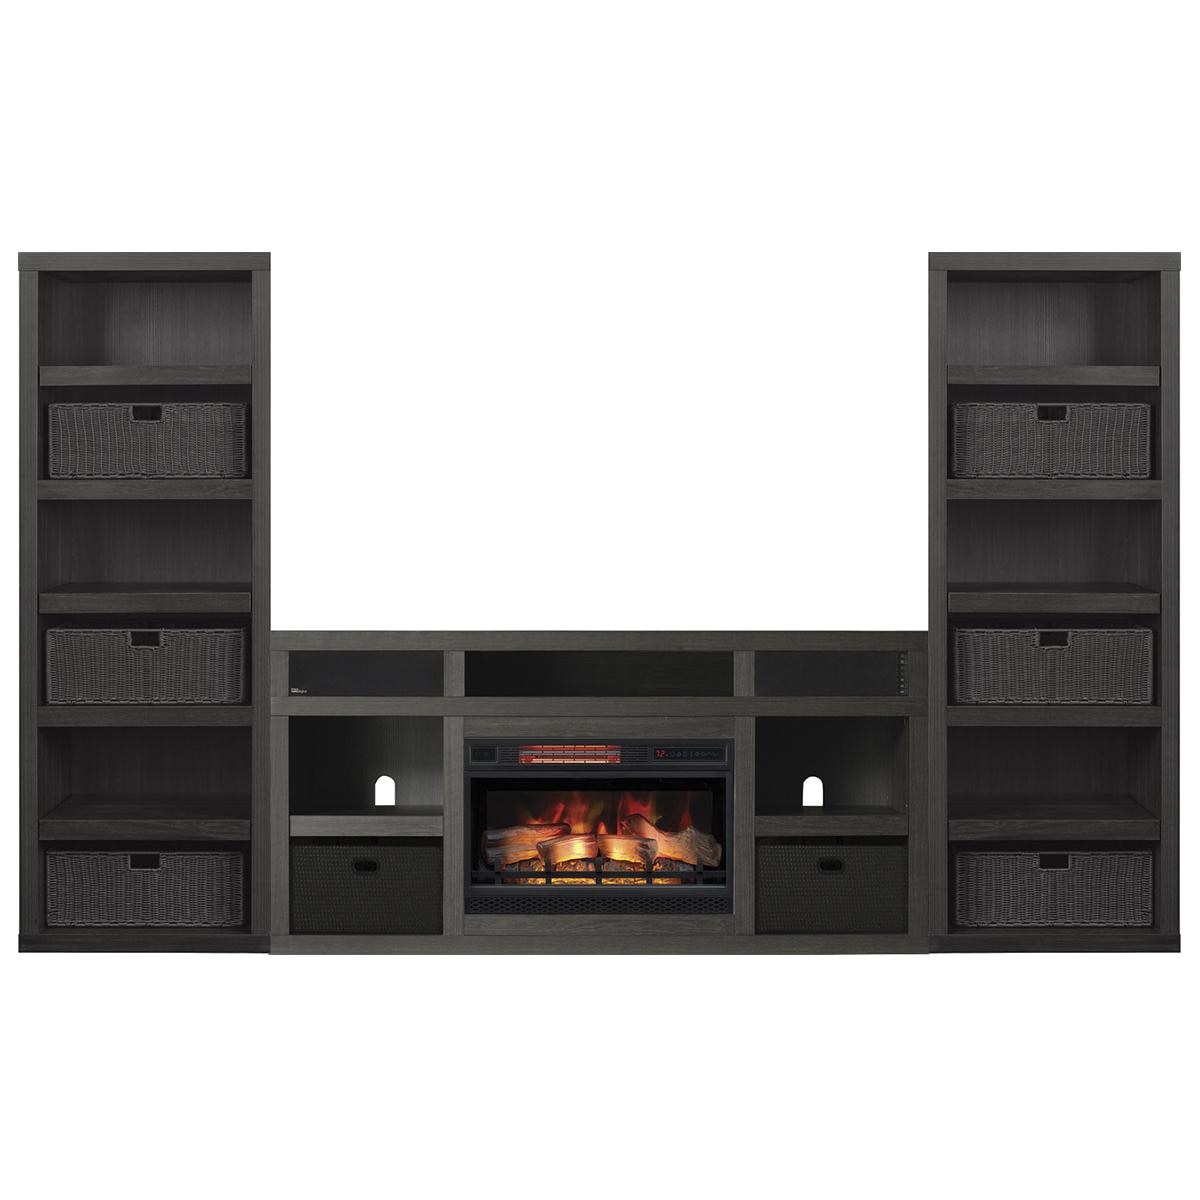 Tv and Fire Wall Lovely Fabio Flames Greatlin 3 Piece Fireplace Entertainment Wall